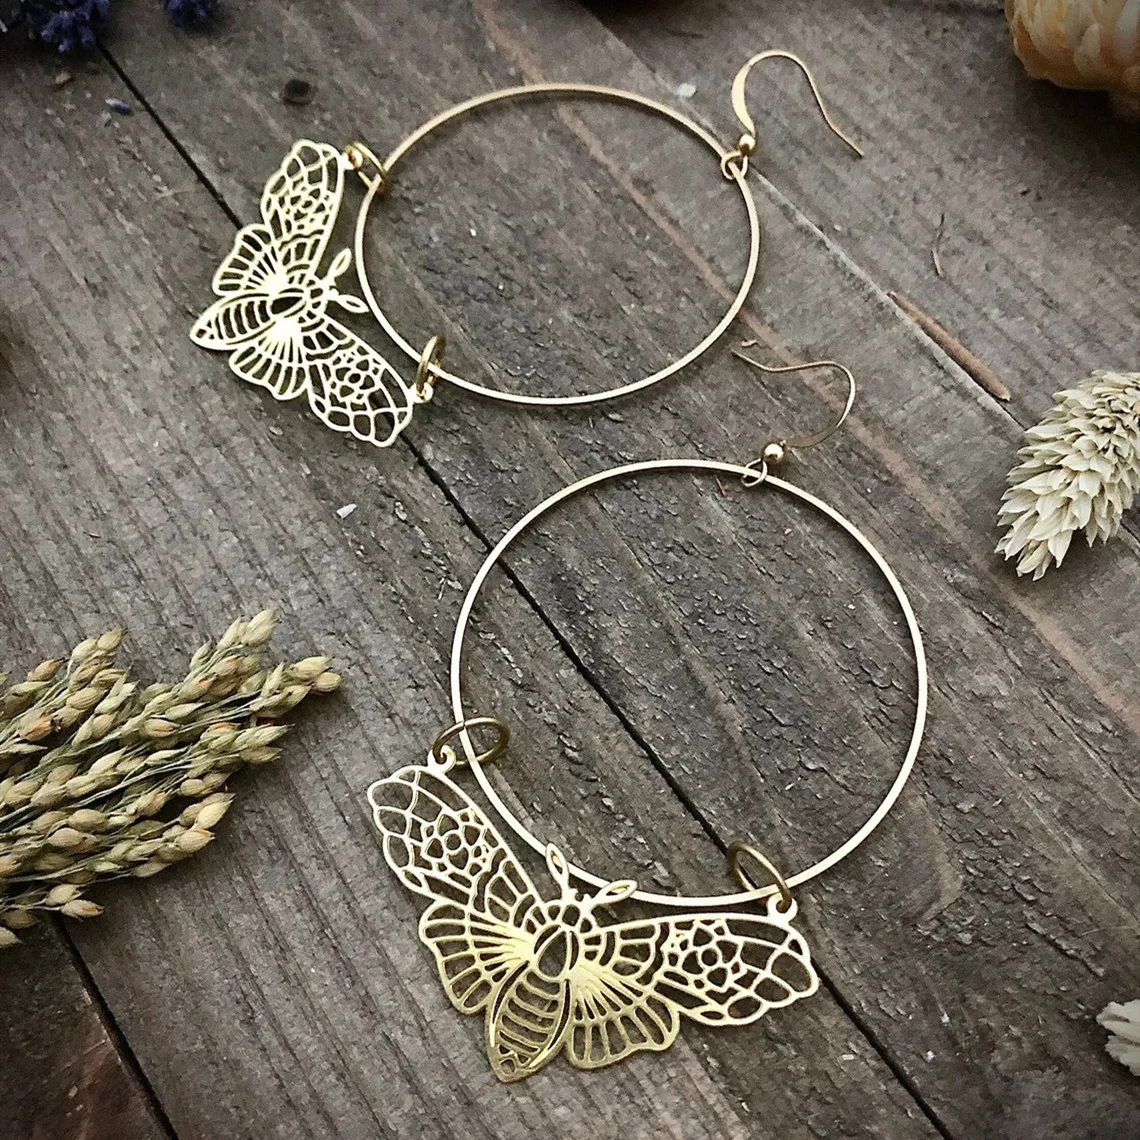 

Gold Color Moth Earrings for Women Girls Cutout Moth Pendant Circle Hoop Earrings Bohemian Jewelry Accessories Gifts for Her